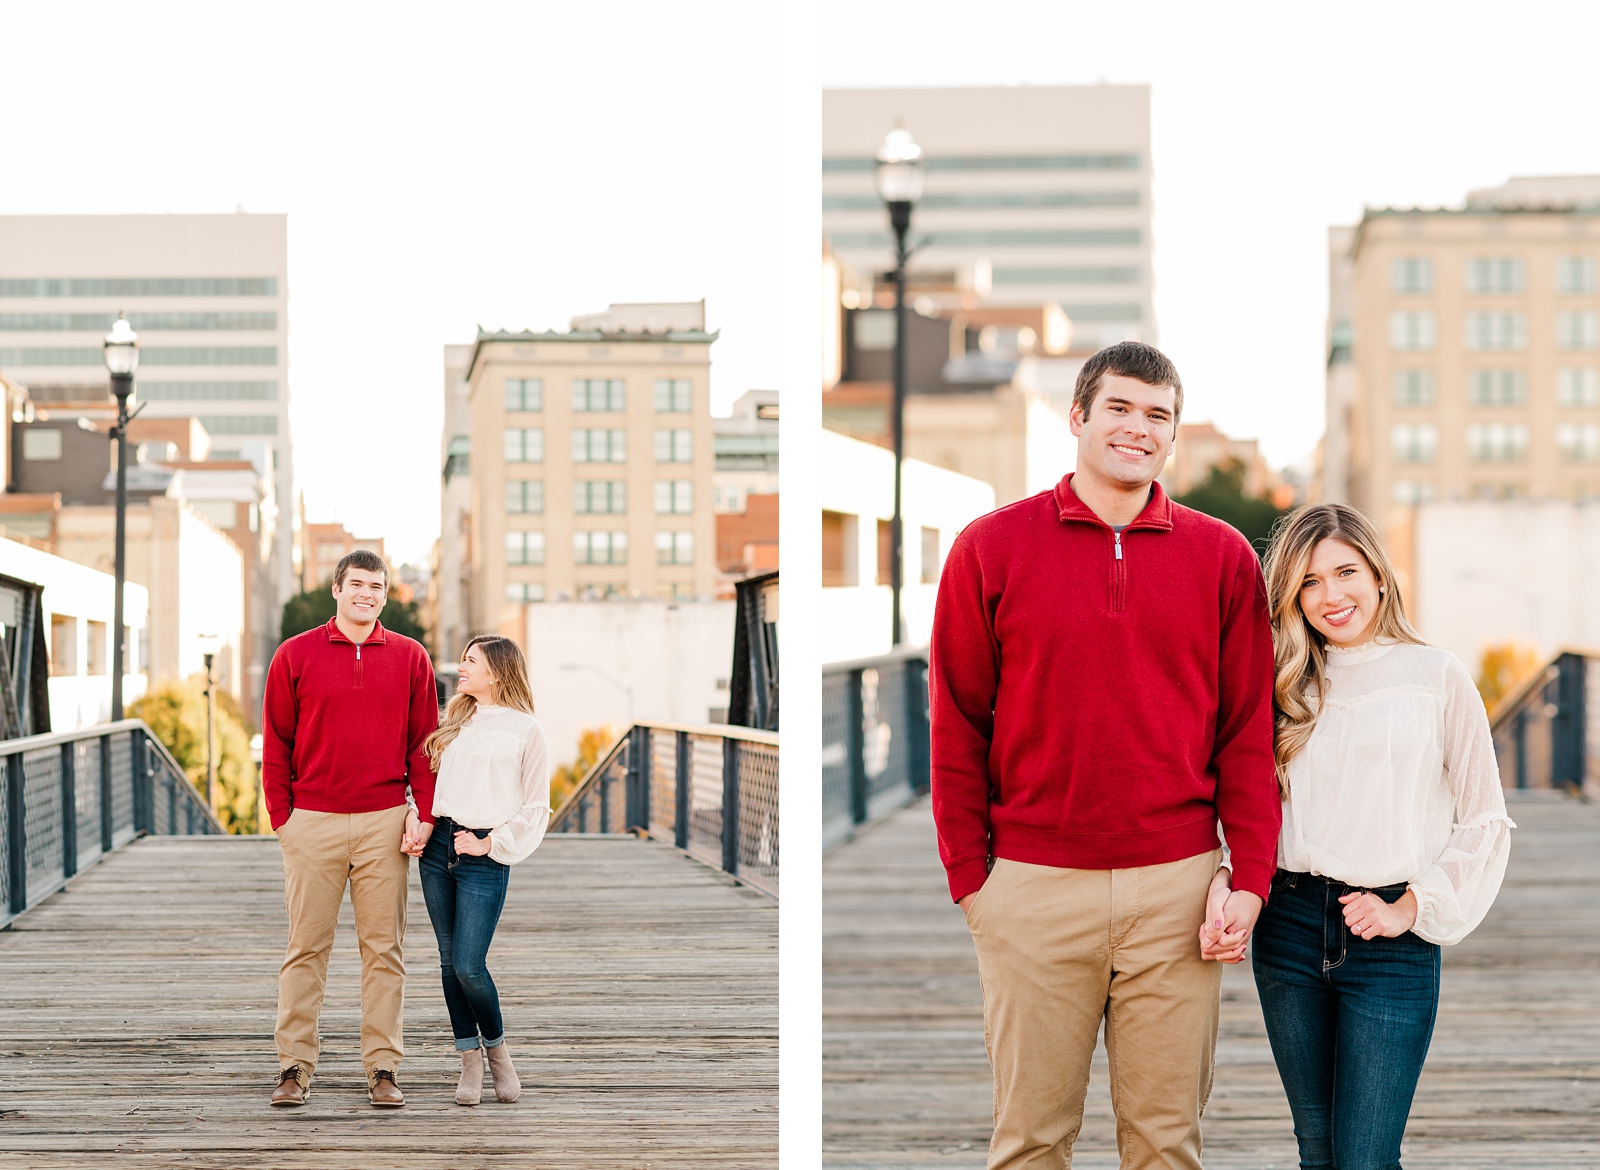 Stylish Sunset Engagement Session in downtown Roanoke by Richmond Wedding Photographer Kailey Brianne Photography 